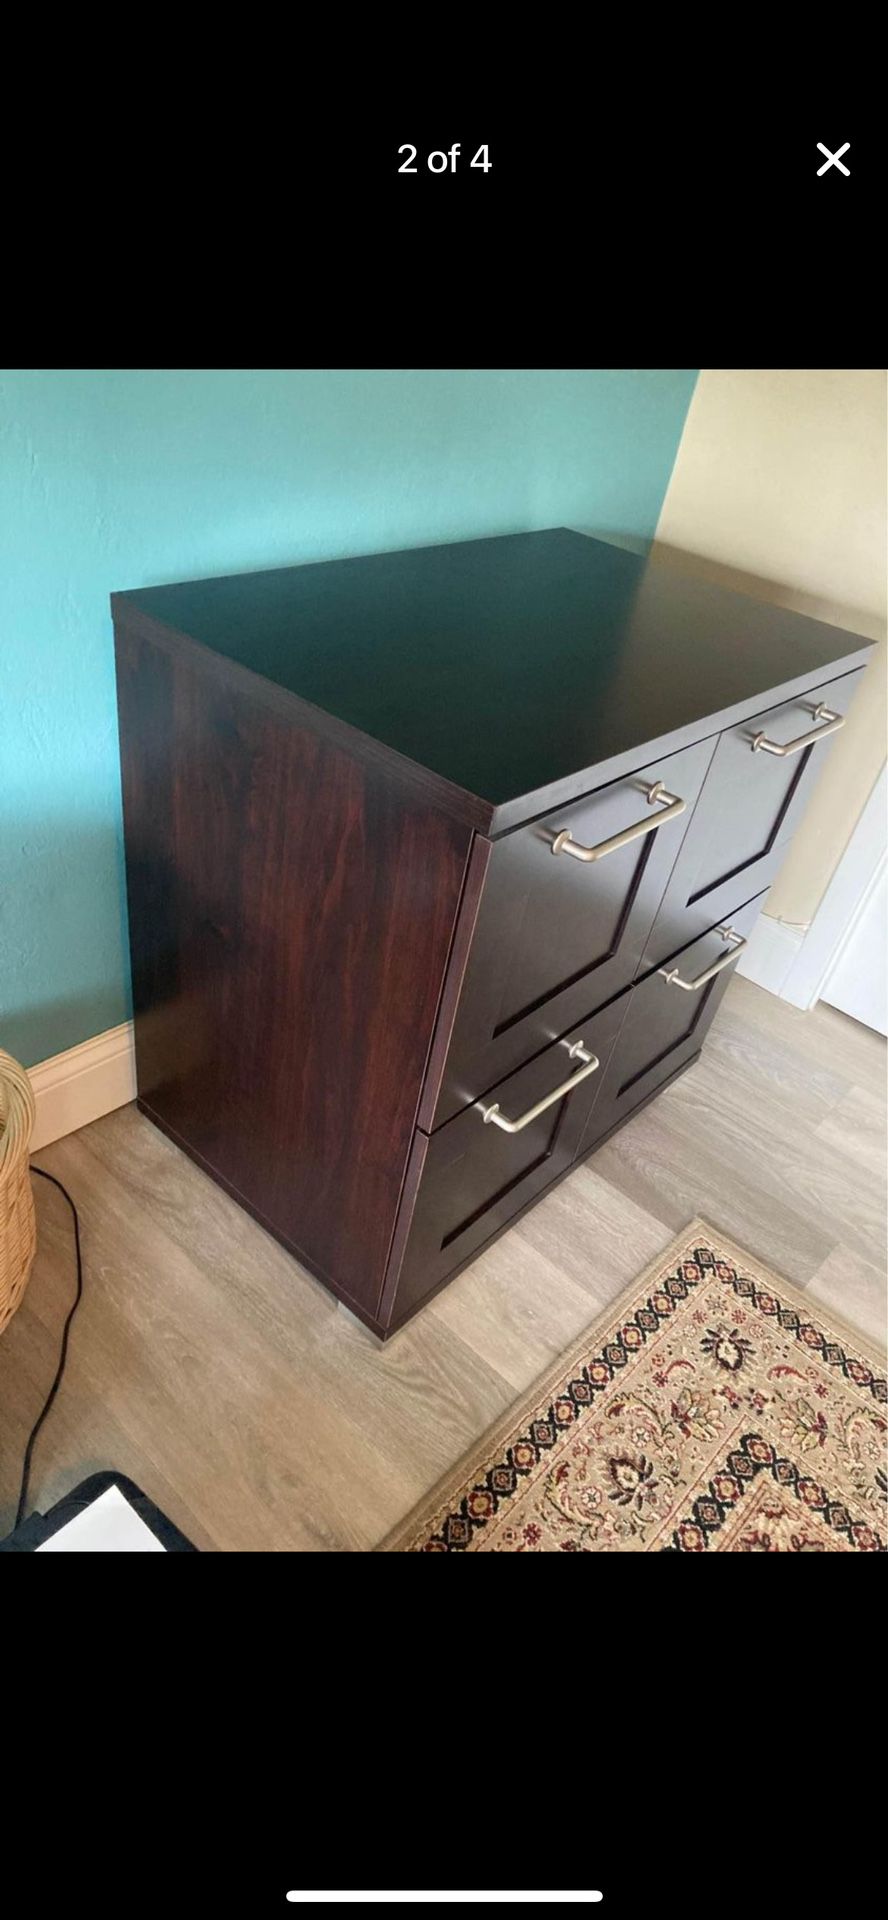 100% Wood and Secure File Cabinet